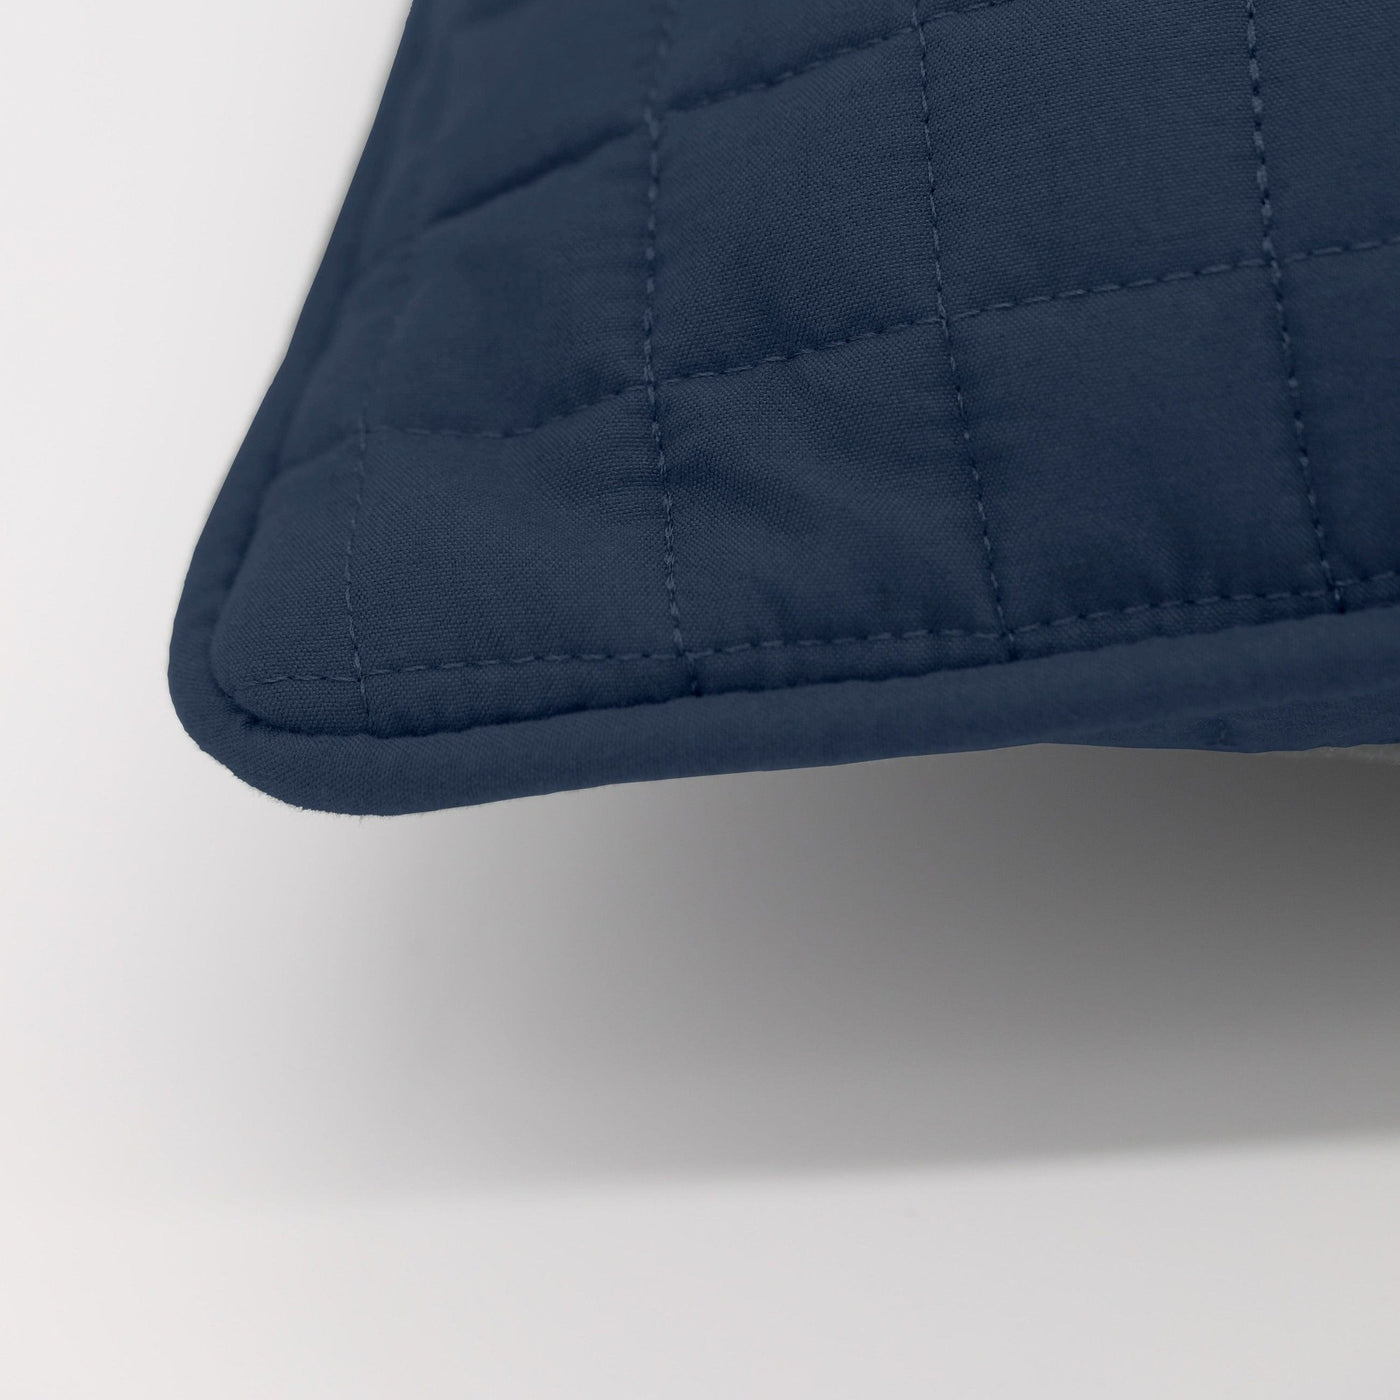 Details and Texture of Vilano Quilted Sham and Pillow Covers in Dark Blue#color_vilano-dark-blue